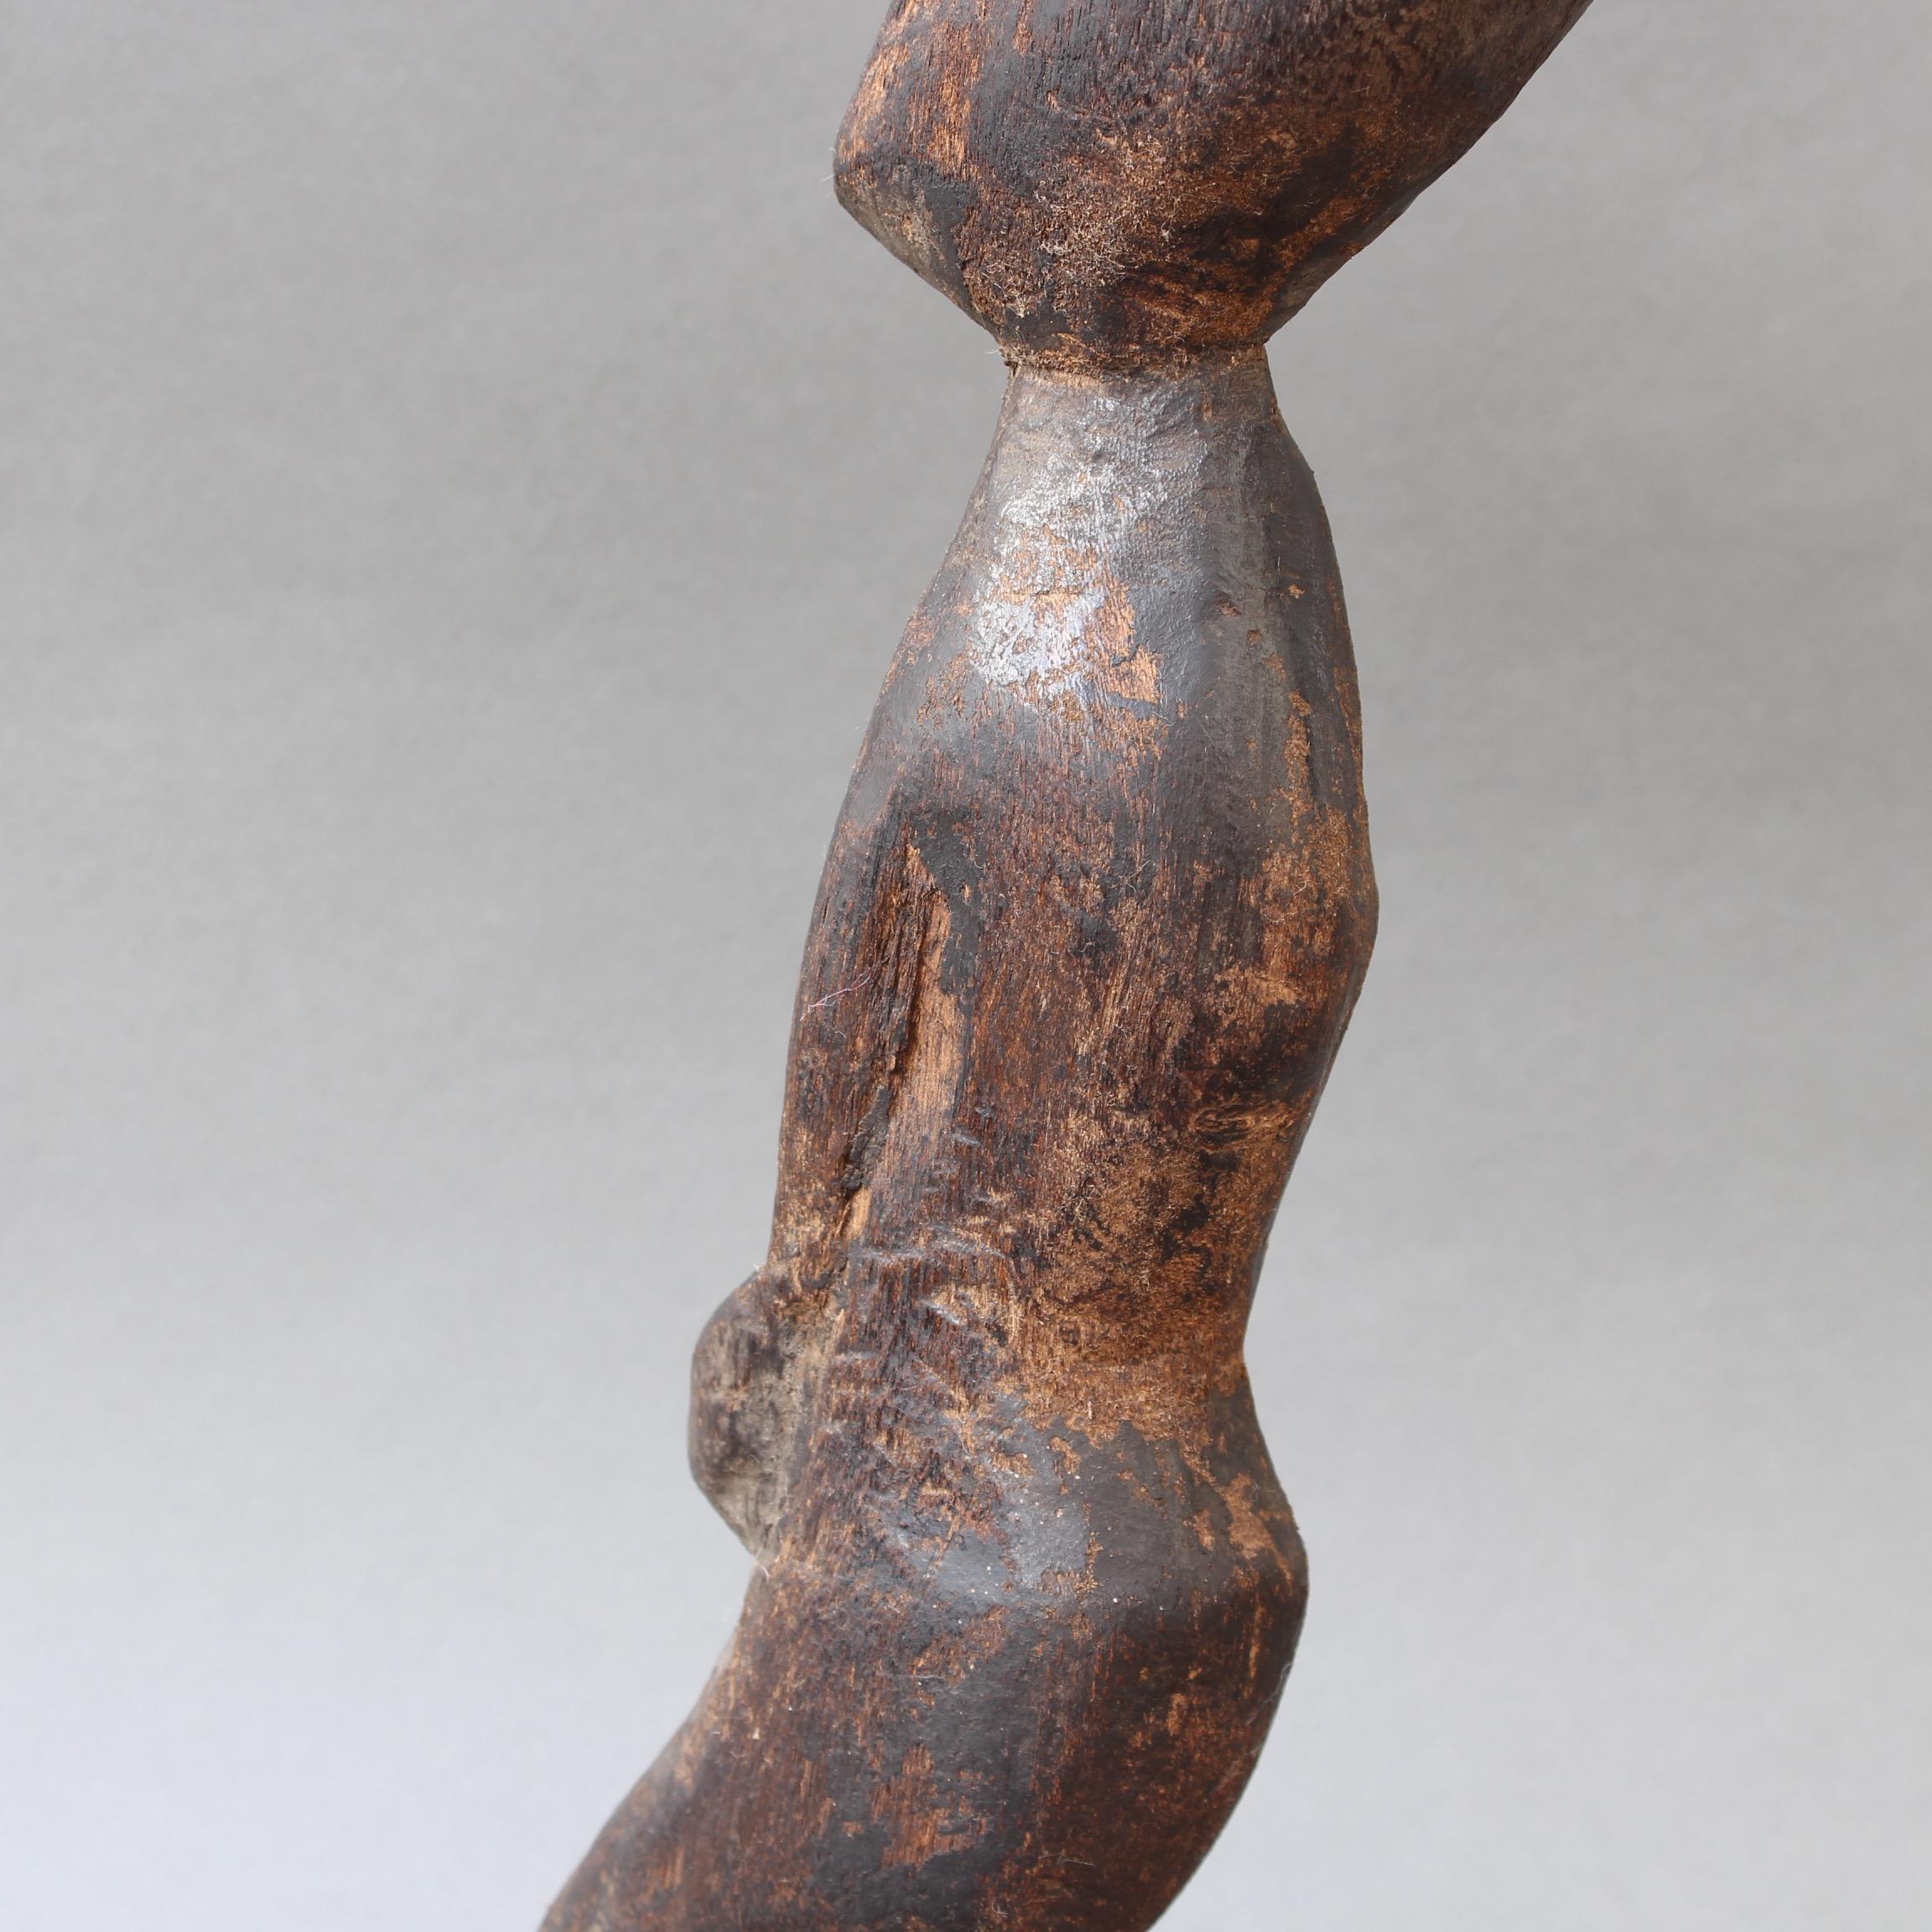 Wooden Carving / Sculpture of Kneeling Wooden Figure from Timor, Indonesia 4